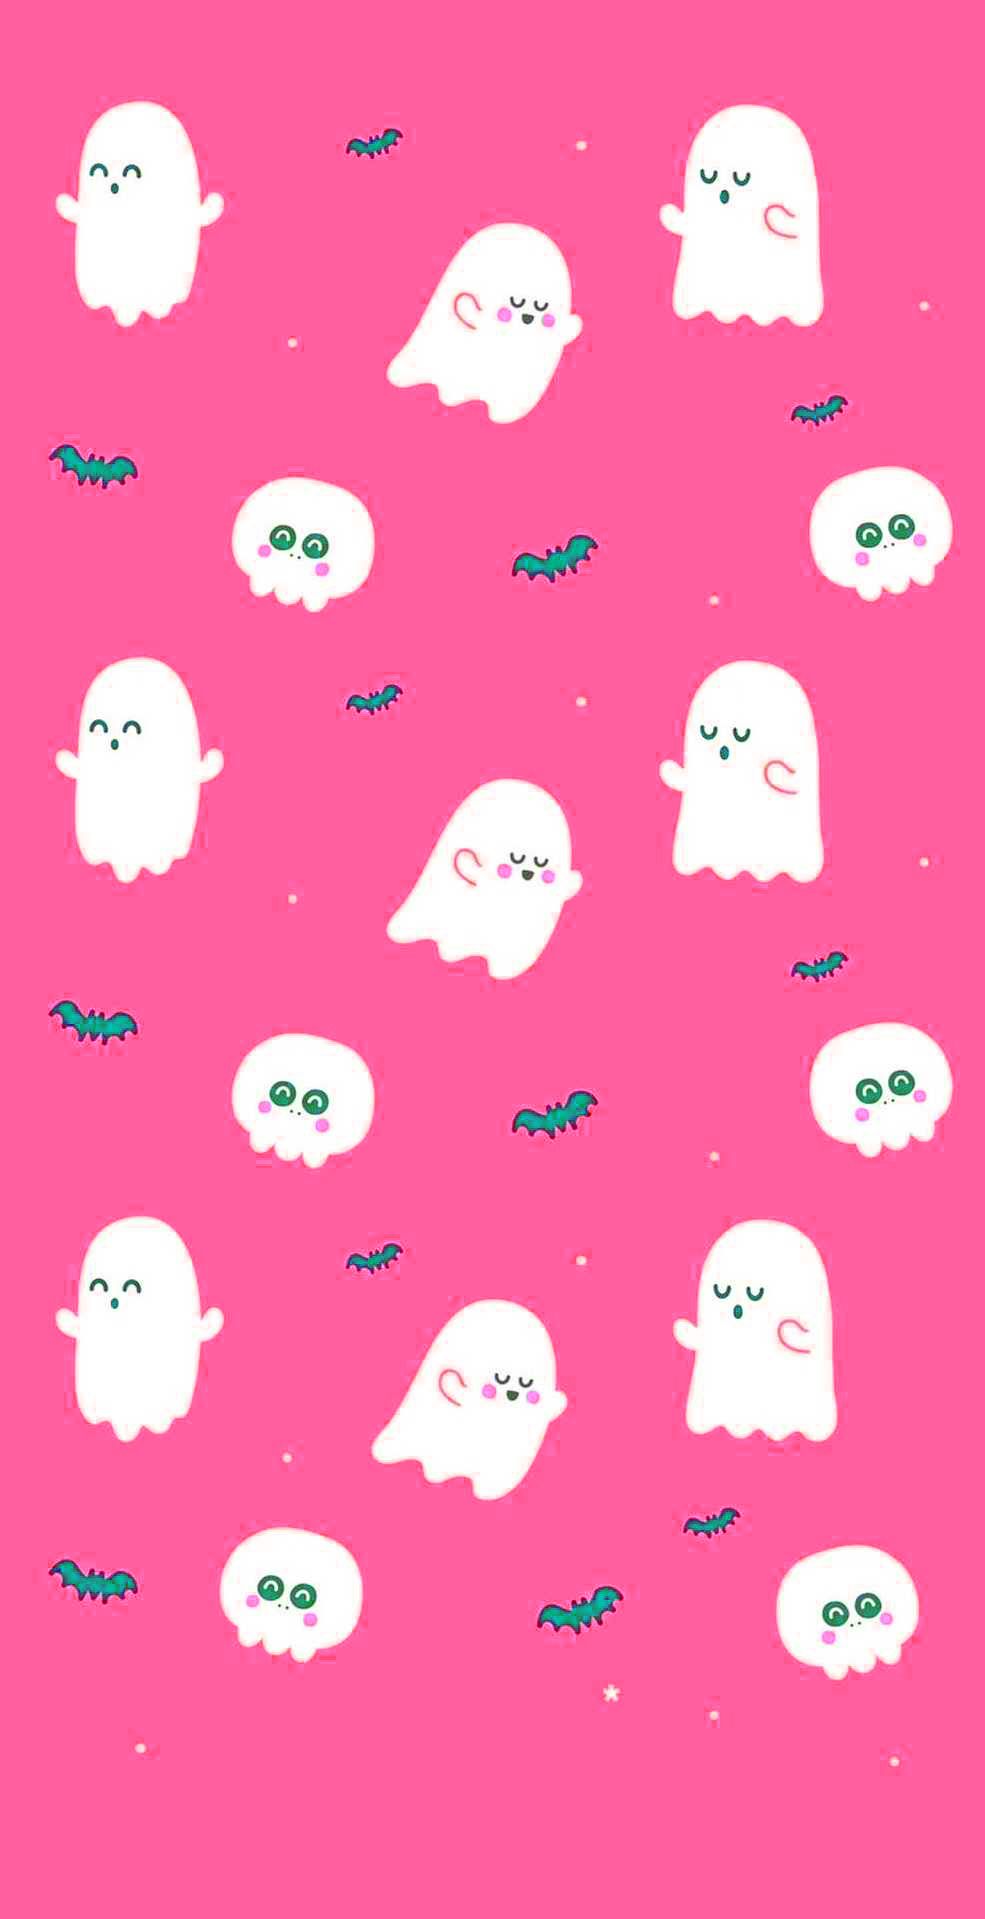 Halloween wallpaper for phone, cute ghost wallpaper, halloween phone background, halloween phone wallpaper, halloween phone case, halloween phone screensaver, halloween phone lock screen, halloween phone home screen, halloween phone background, halloween phone wallpaper, halloween phone case, halloween phone screensaver, halloween phone lock screen, halloween phone home screen, halloween phone background, halloween phone wallpaper, halloween phone case, halloween phone screensaver, halloween phone lock screen, halloween phone home screen - Ghost